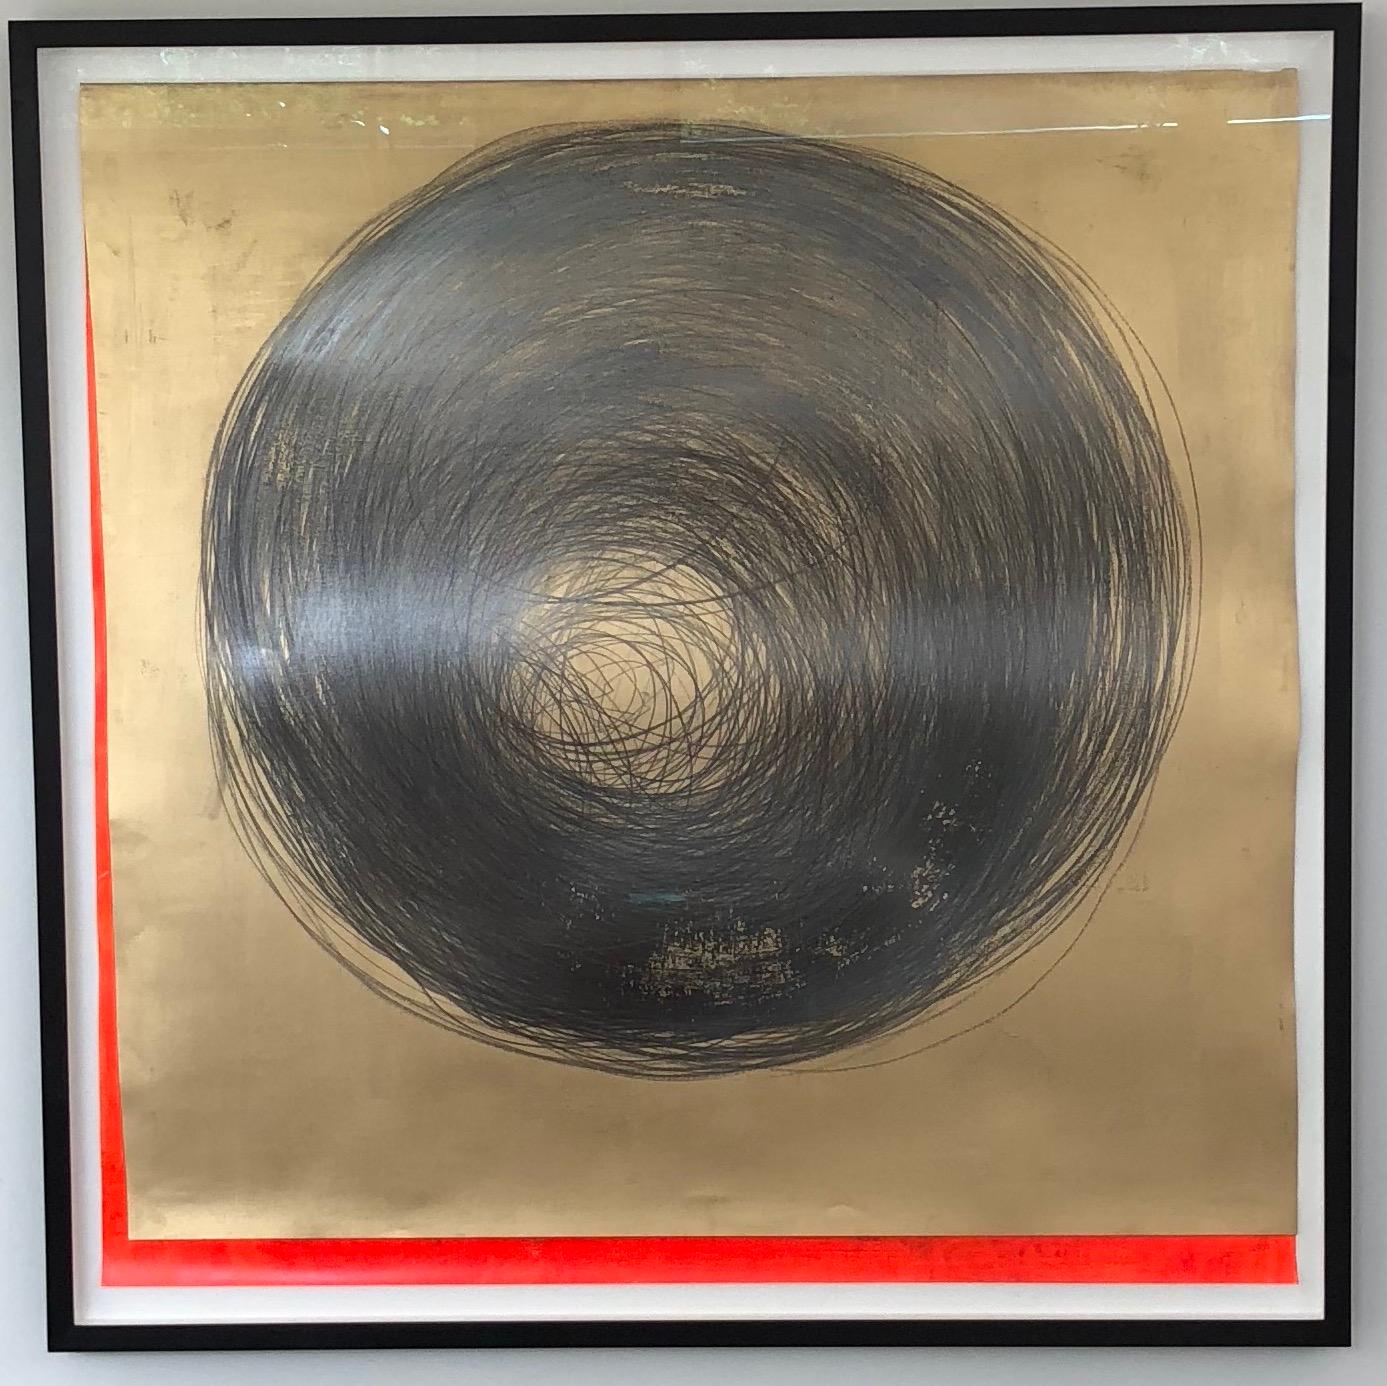 'Work no. 1 (Circle Drawing), Gold / Neon Red, 2018’ graphite and 23ct gold leaf on 315gsm Heritage Fine Art Paper by Carali McCall (born 1981).  

McCall began her ‘Circle Drawing' artworks in 2004 where she focuses on the durational element and